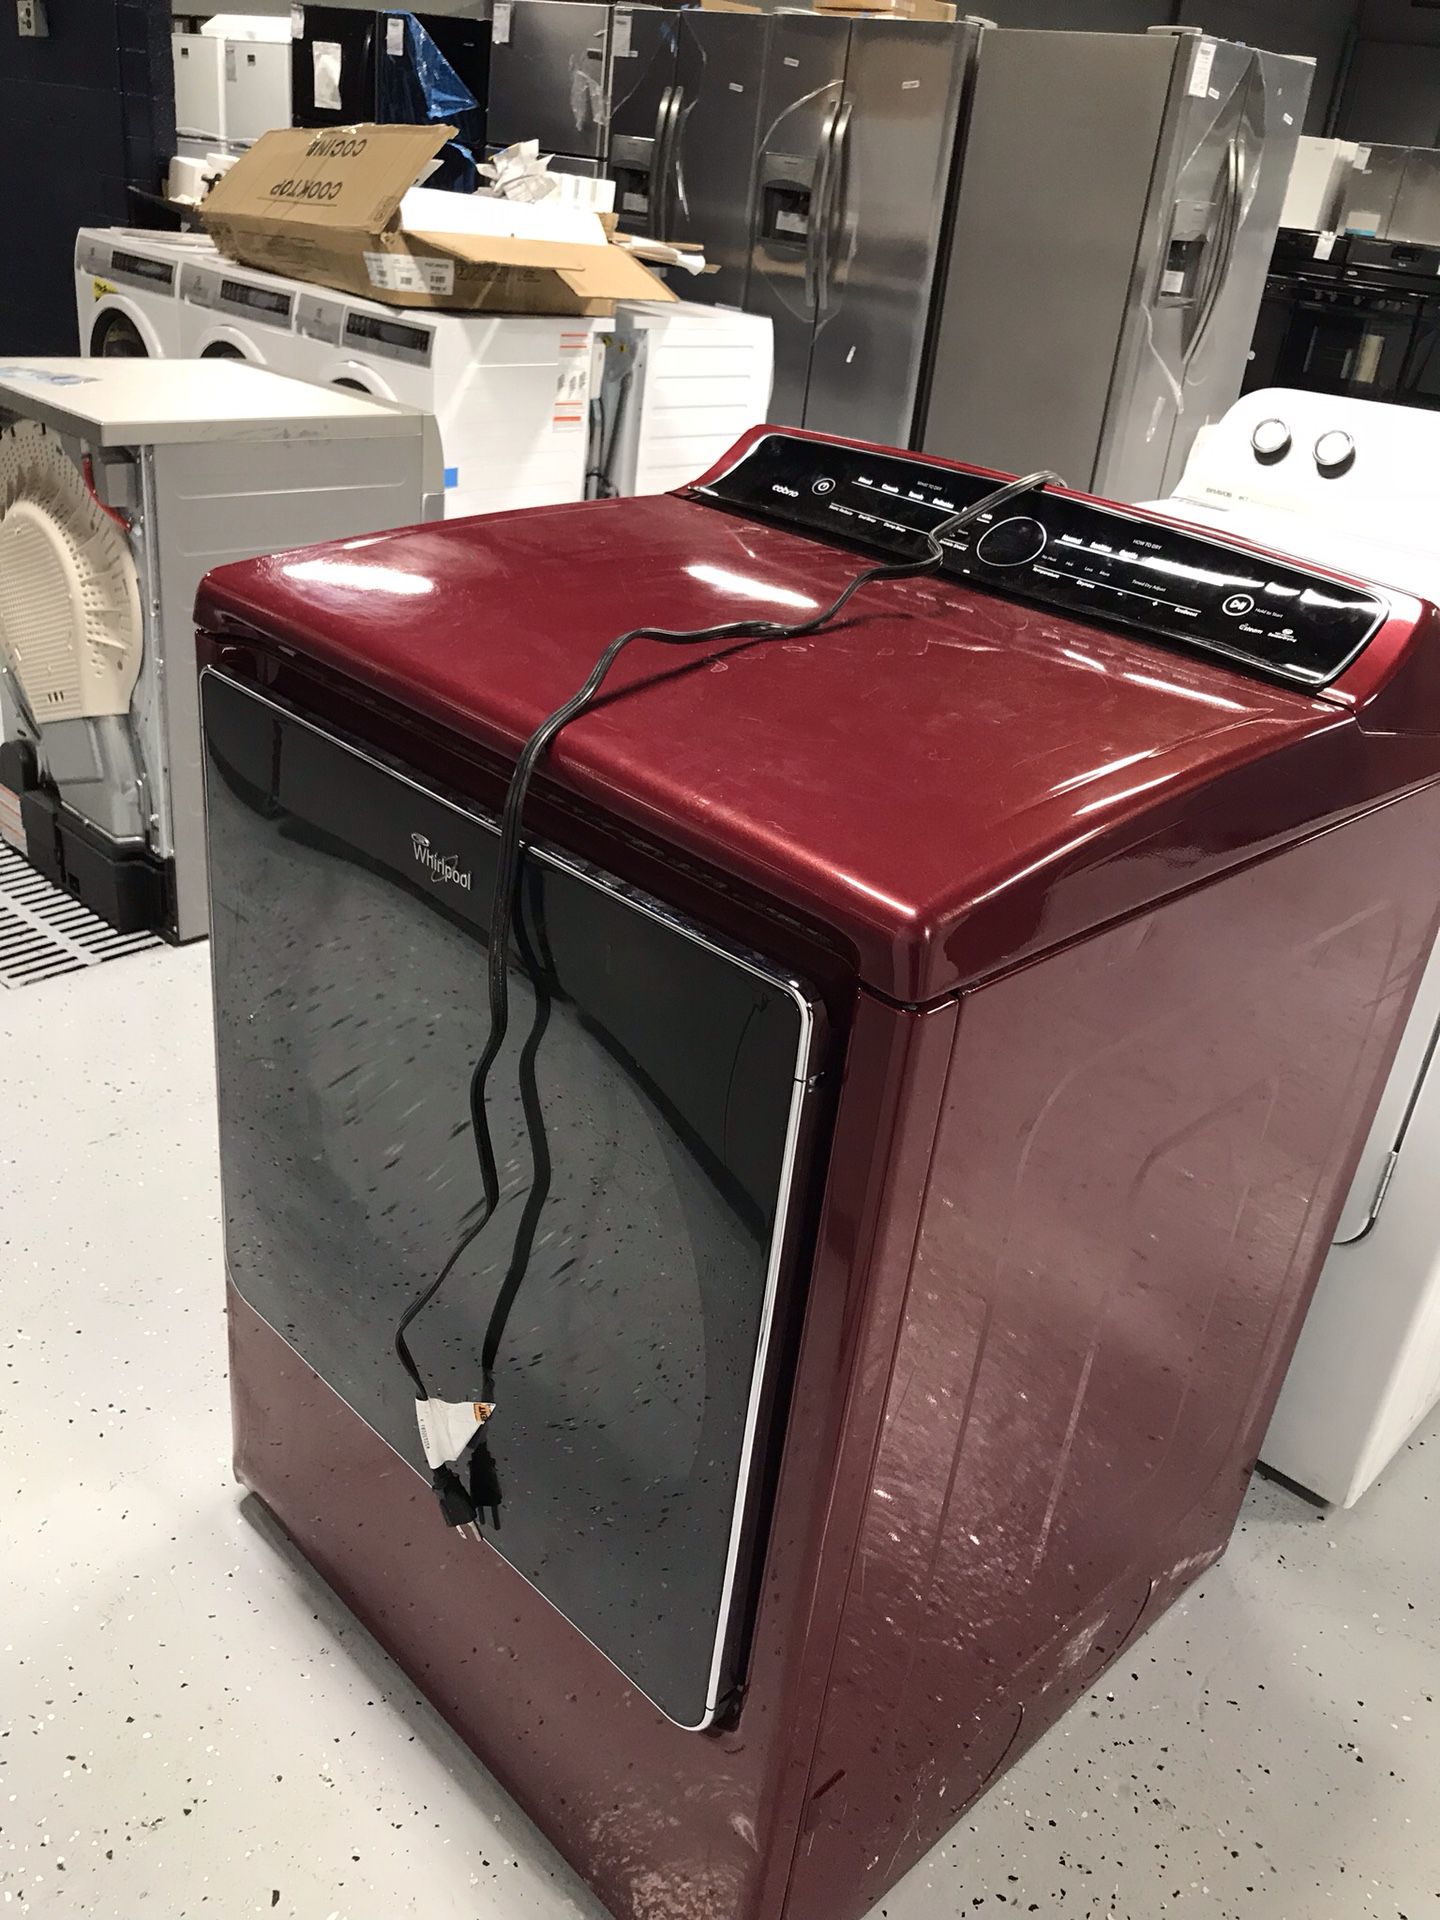 Whirlpool red washer